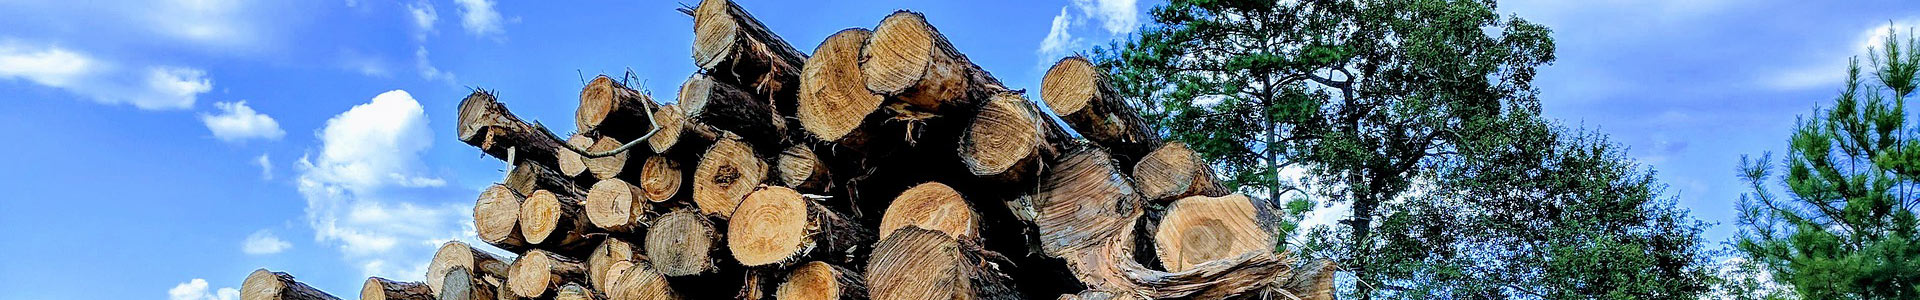 pile of harvested timber logs